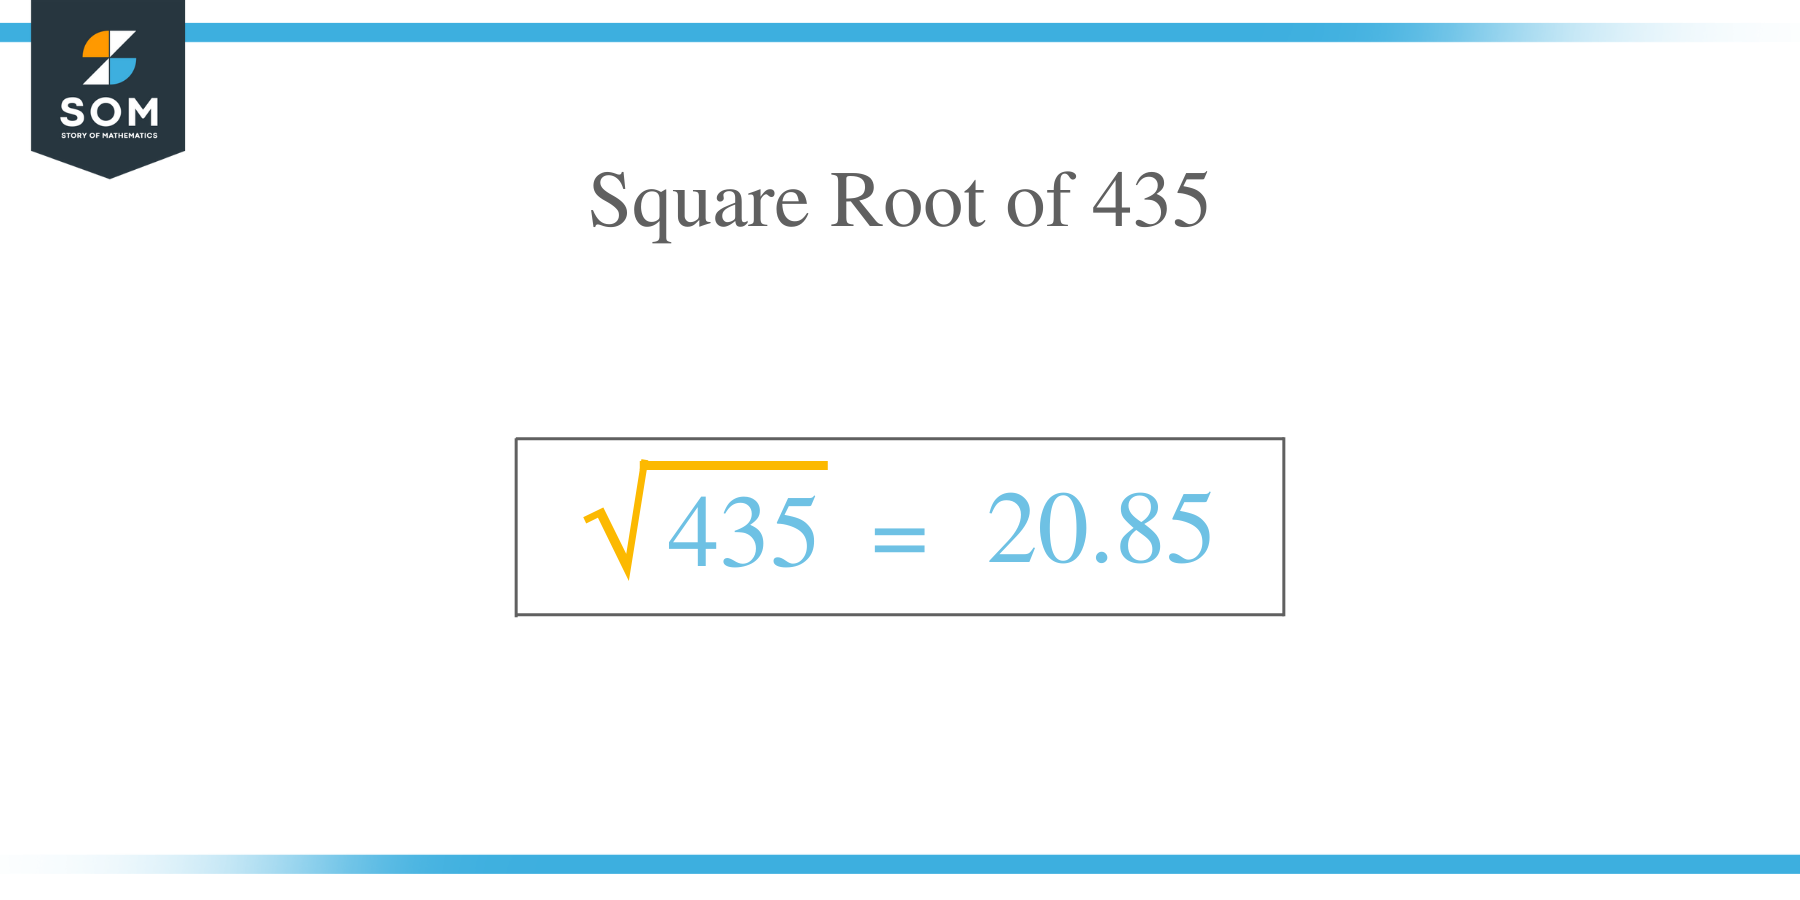 Square Root of 435